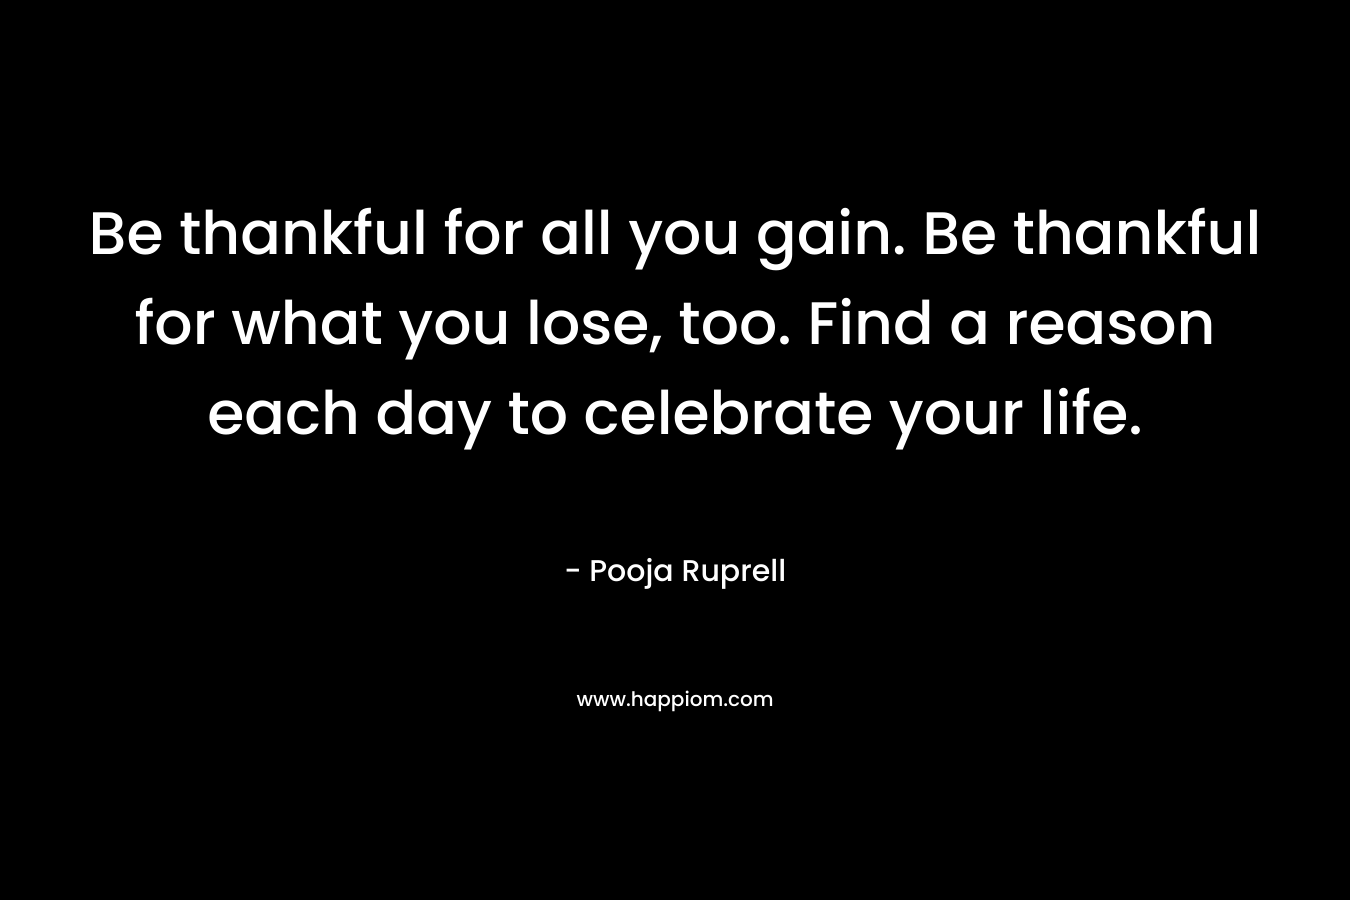 Be thankful for all you gain. Be thankful for what you lose, too. Find a reason each day to celebrate your life.